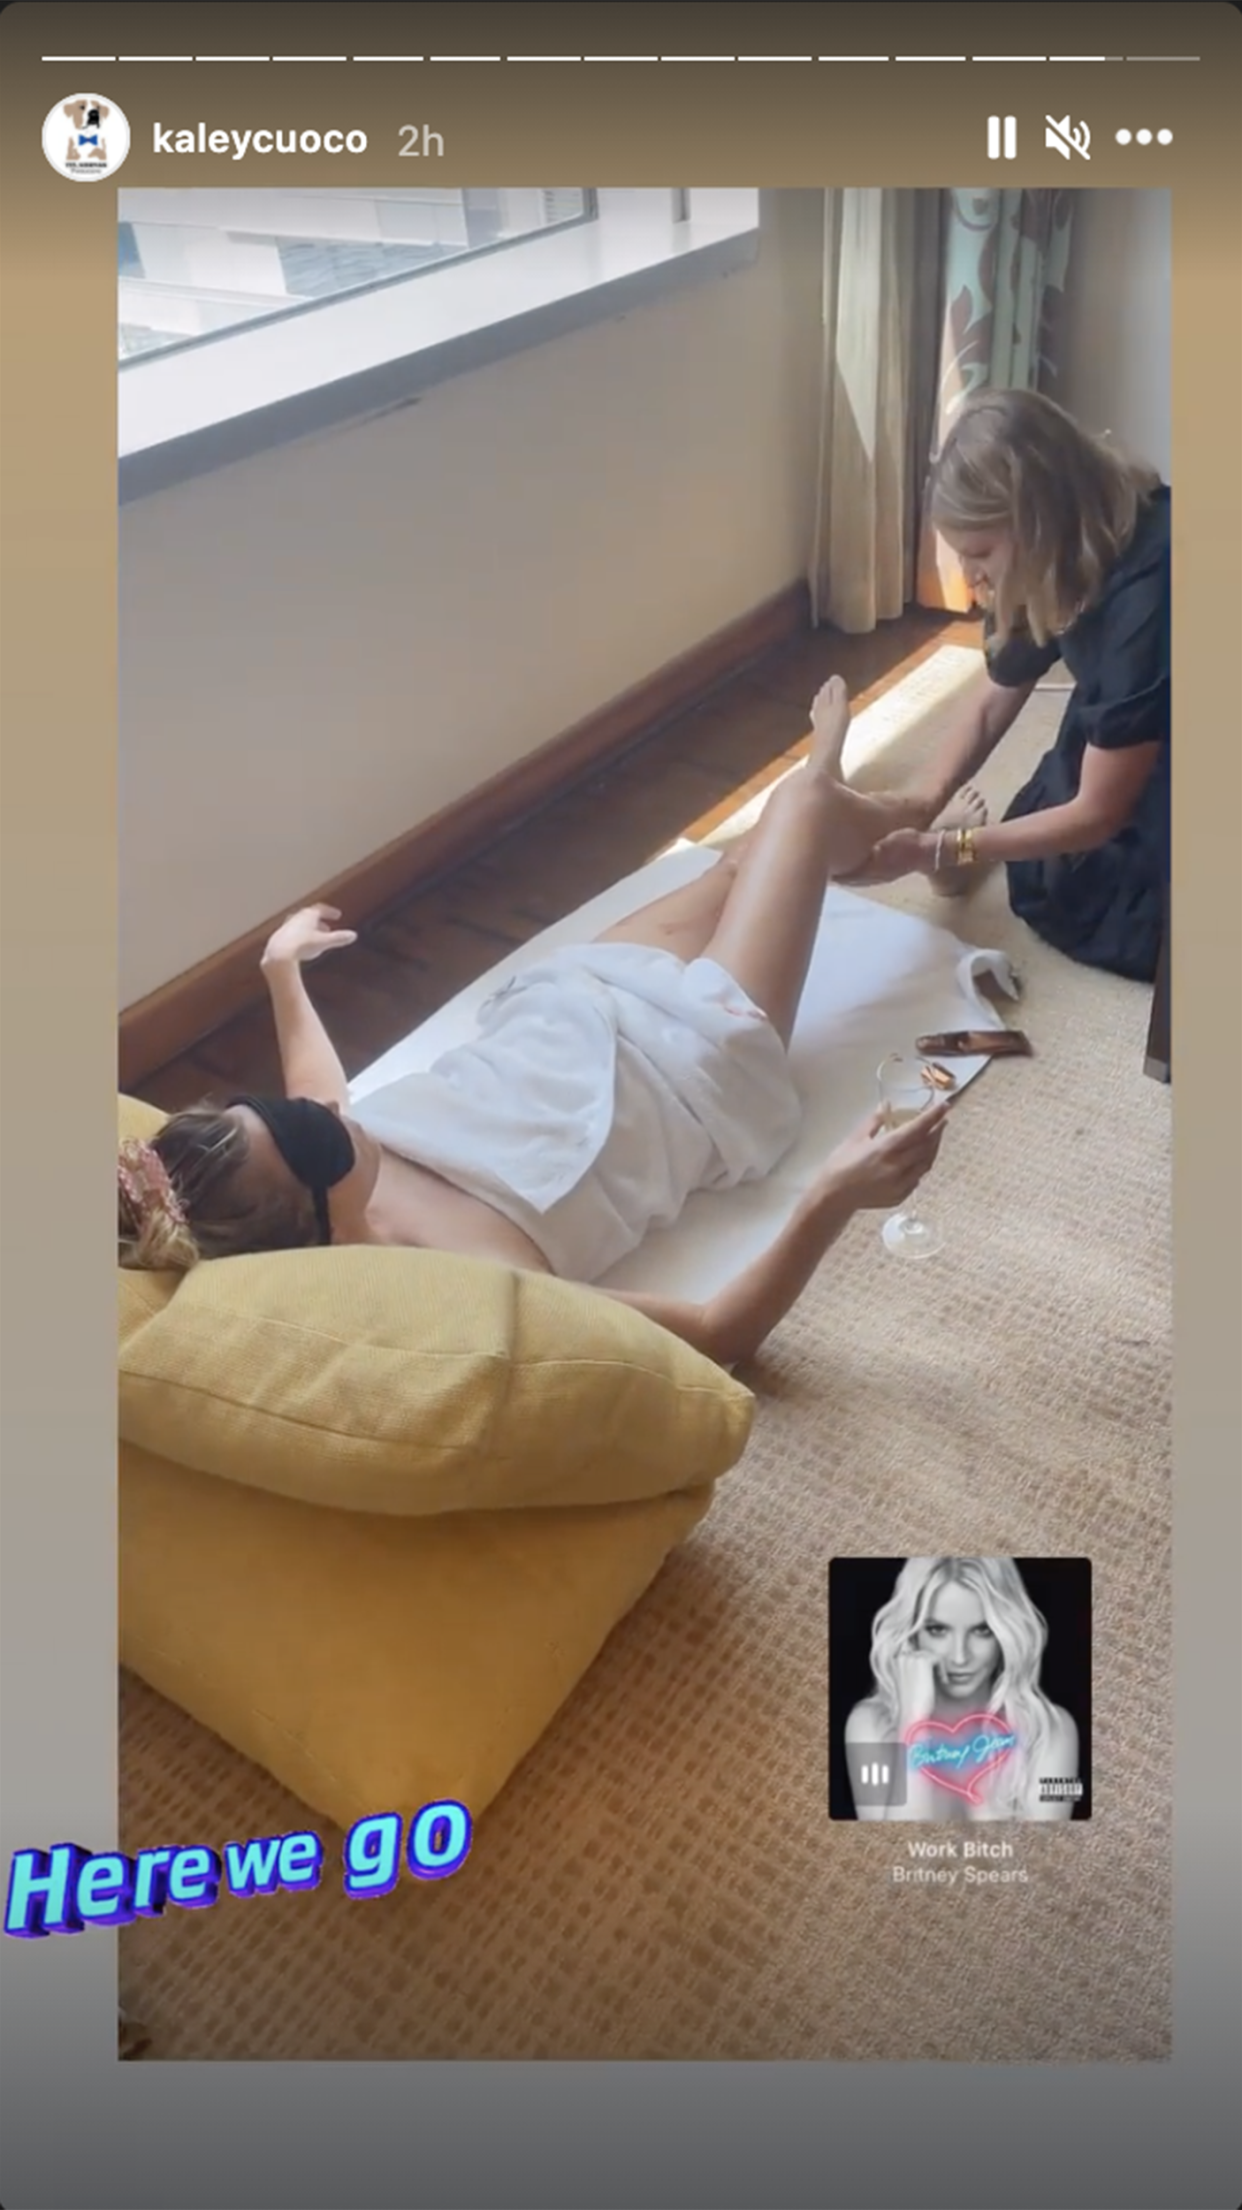 Cuoco shared a video getting a massage and enjoying a glass of wine. (Kaley Cuoco / Instagram)